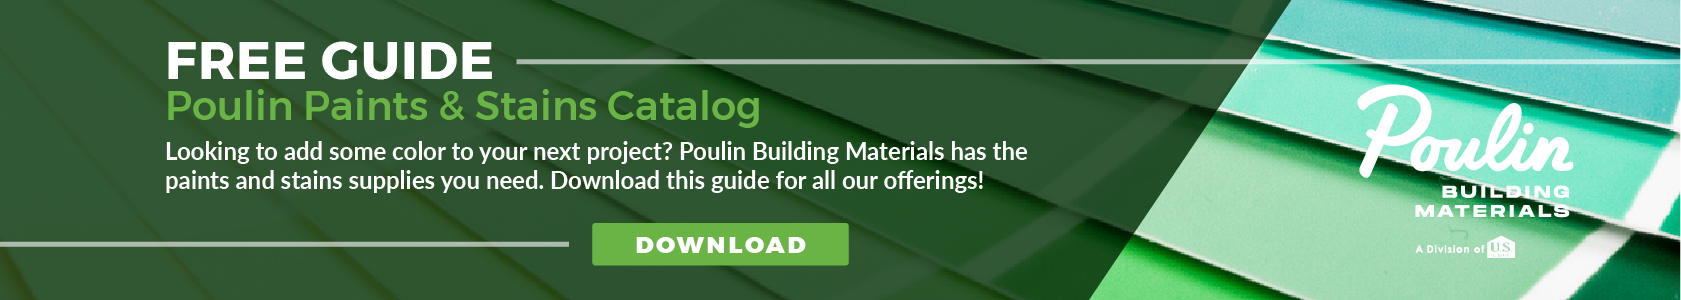 Free guide to Poulin Lumber's paints and stains